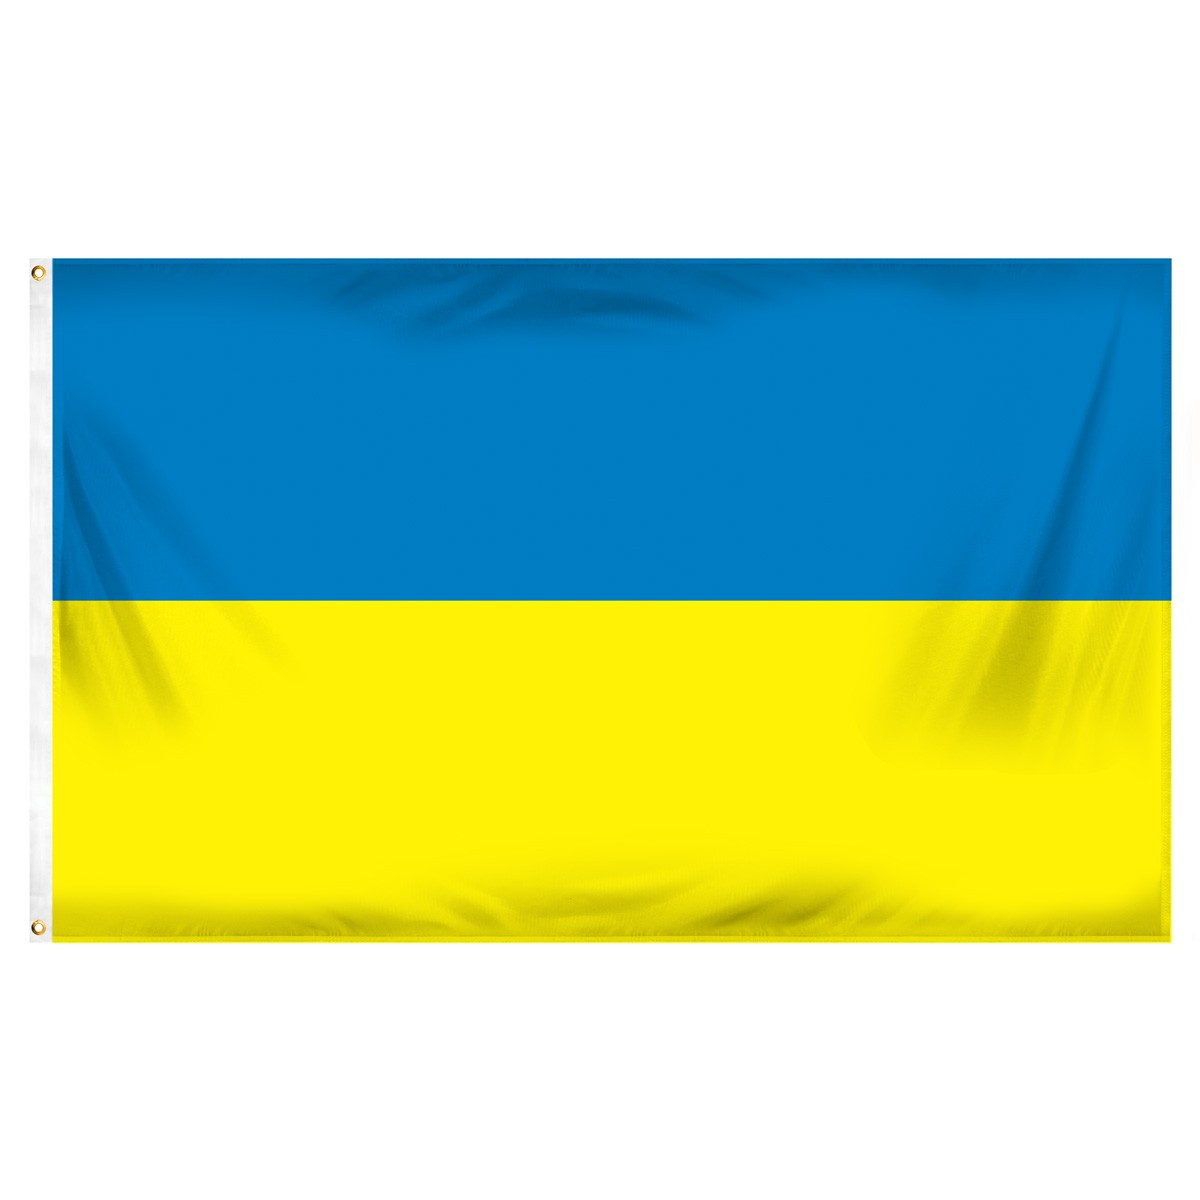 Ukraine Submit Flags and Flags